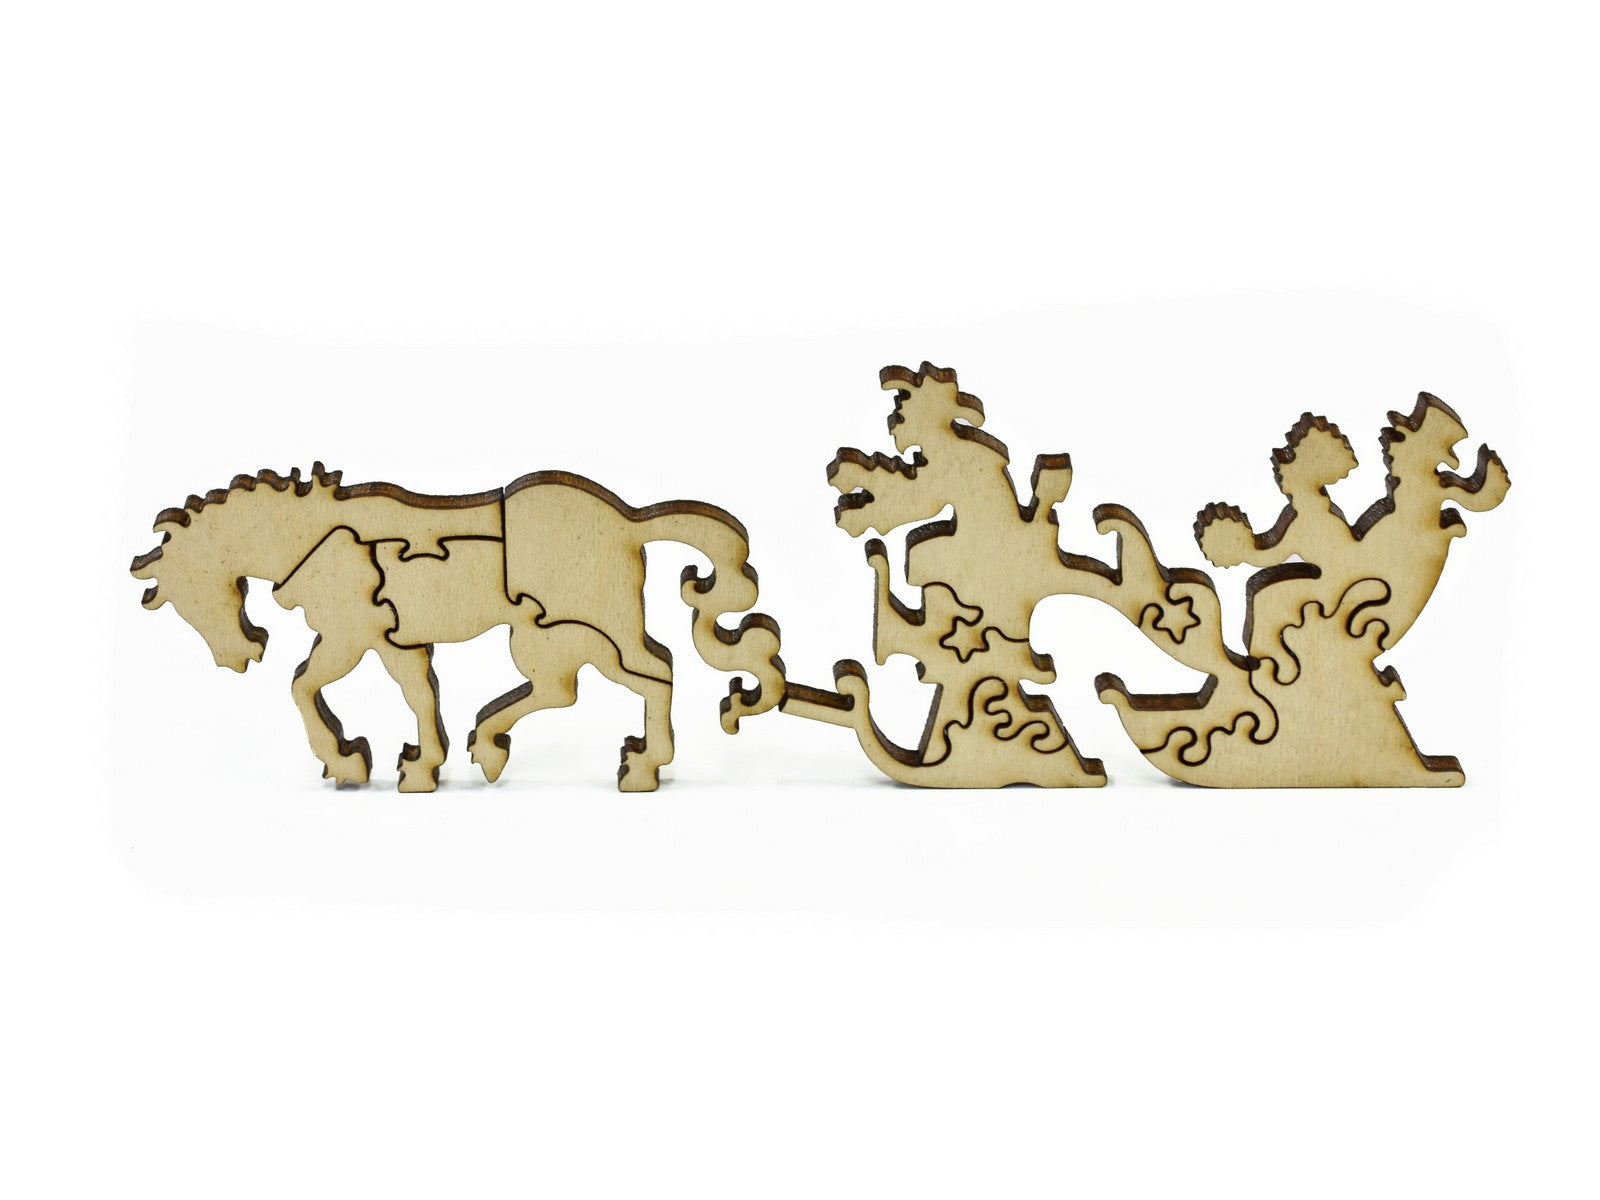 A closeup of pieces in the shape of a horse pulling a sleigh.